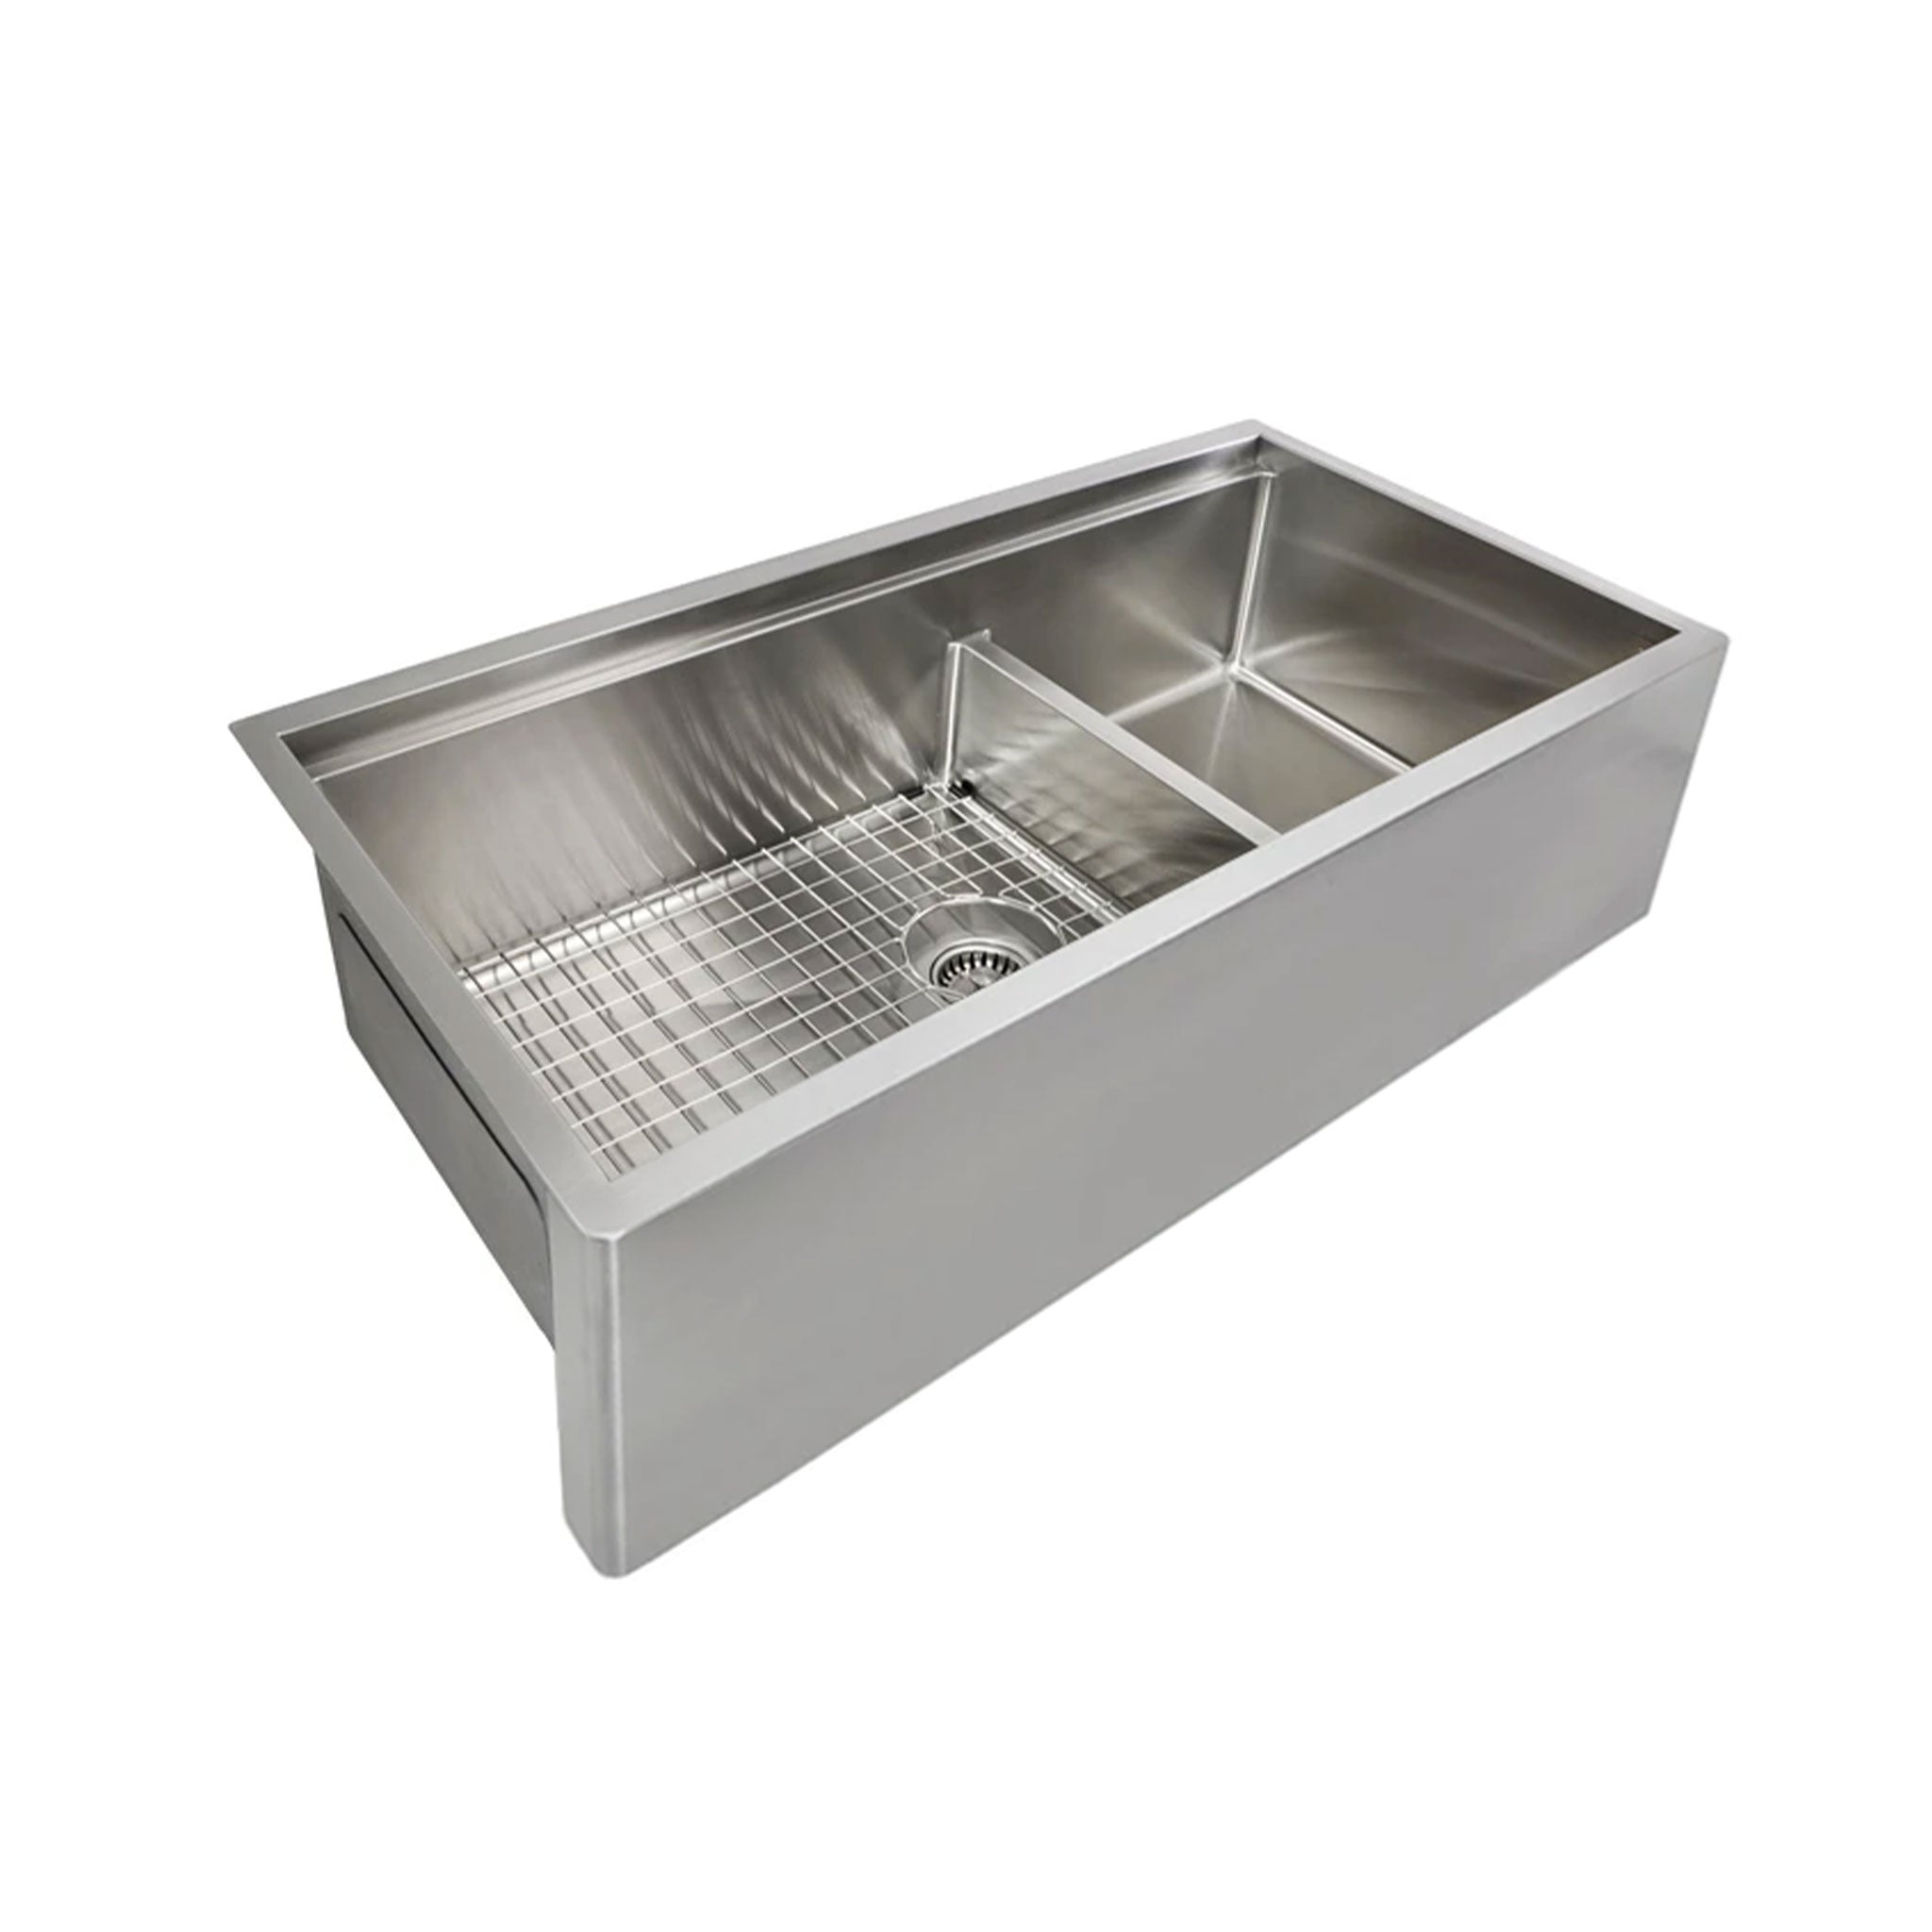 Double Bowl Apron Front Kitchen Sink With Seamless Drains, Protective Grid Basin and Farmhouse Style Apron